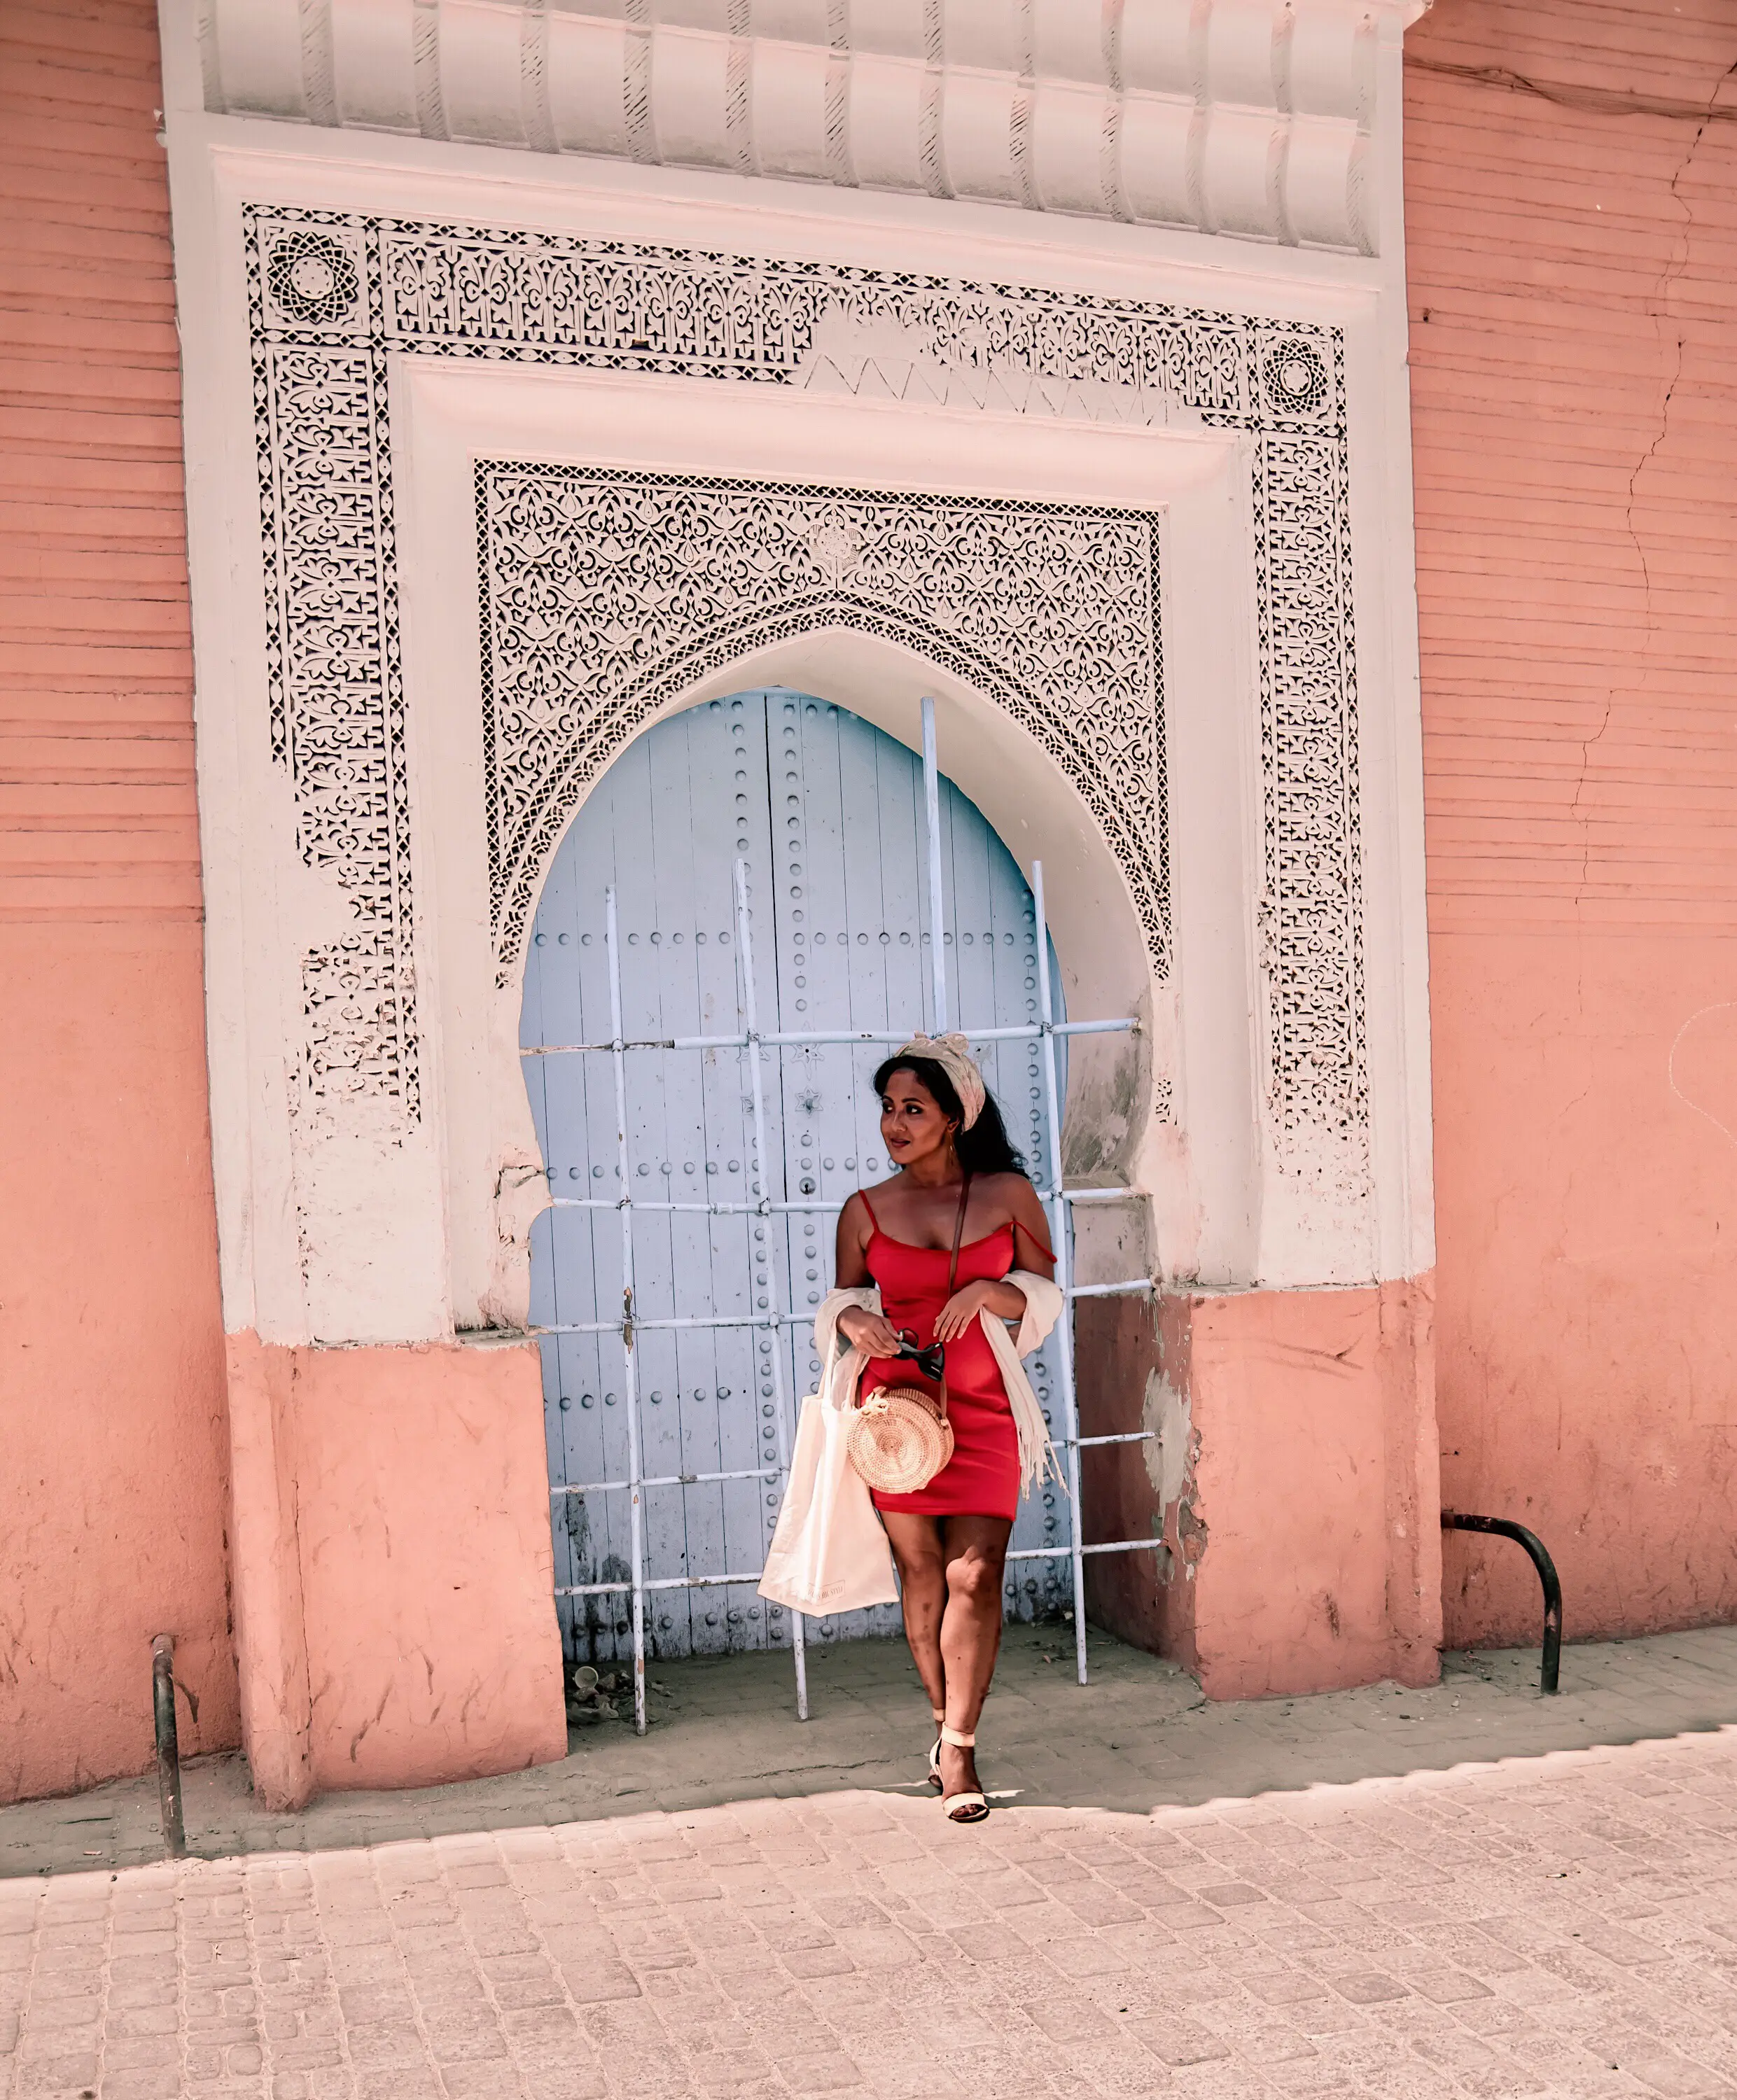 What-Color-Shoes-To-Wear-With-A-Red-Dress-How-To-Wear-A-Summer-Red-Dress-What-To-Wear-In-Morocco-Marrakech-Paris-Chic-Style-2